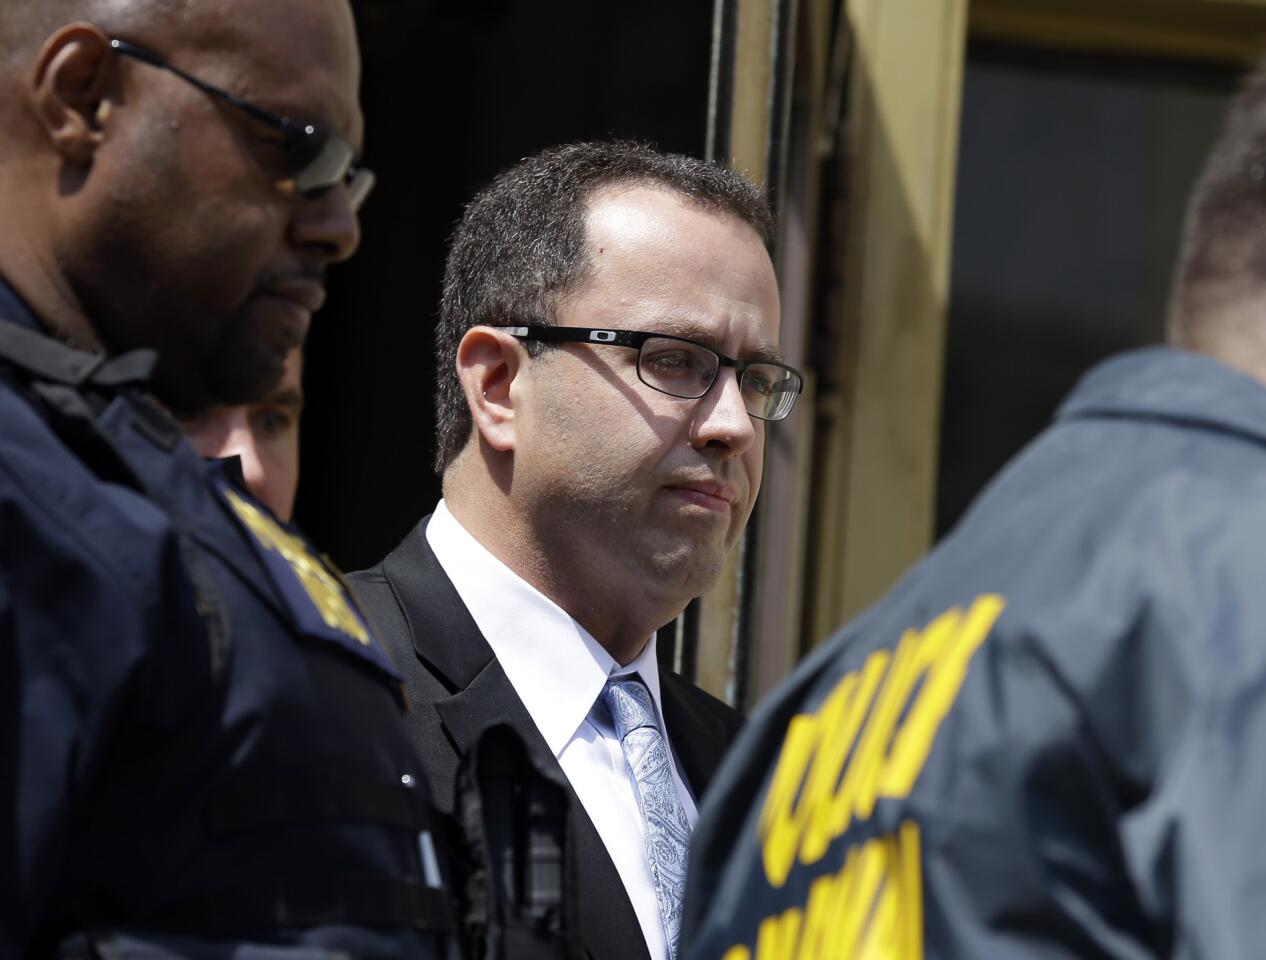 Former Subway pitchman Jared Fogle leaves the federal courthouse in Indianapolis on Aug. 19, 2015, after a hearing on child pornography charges.